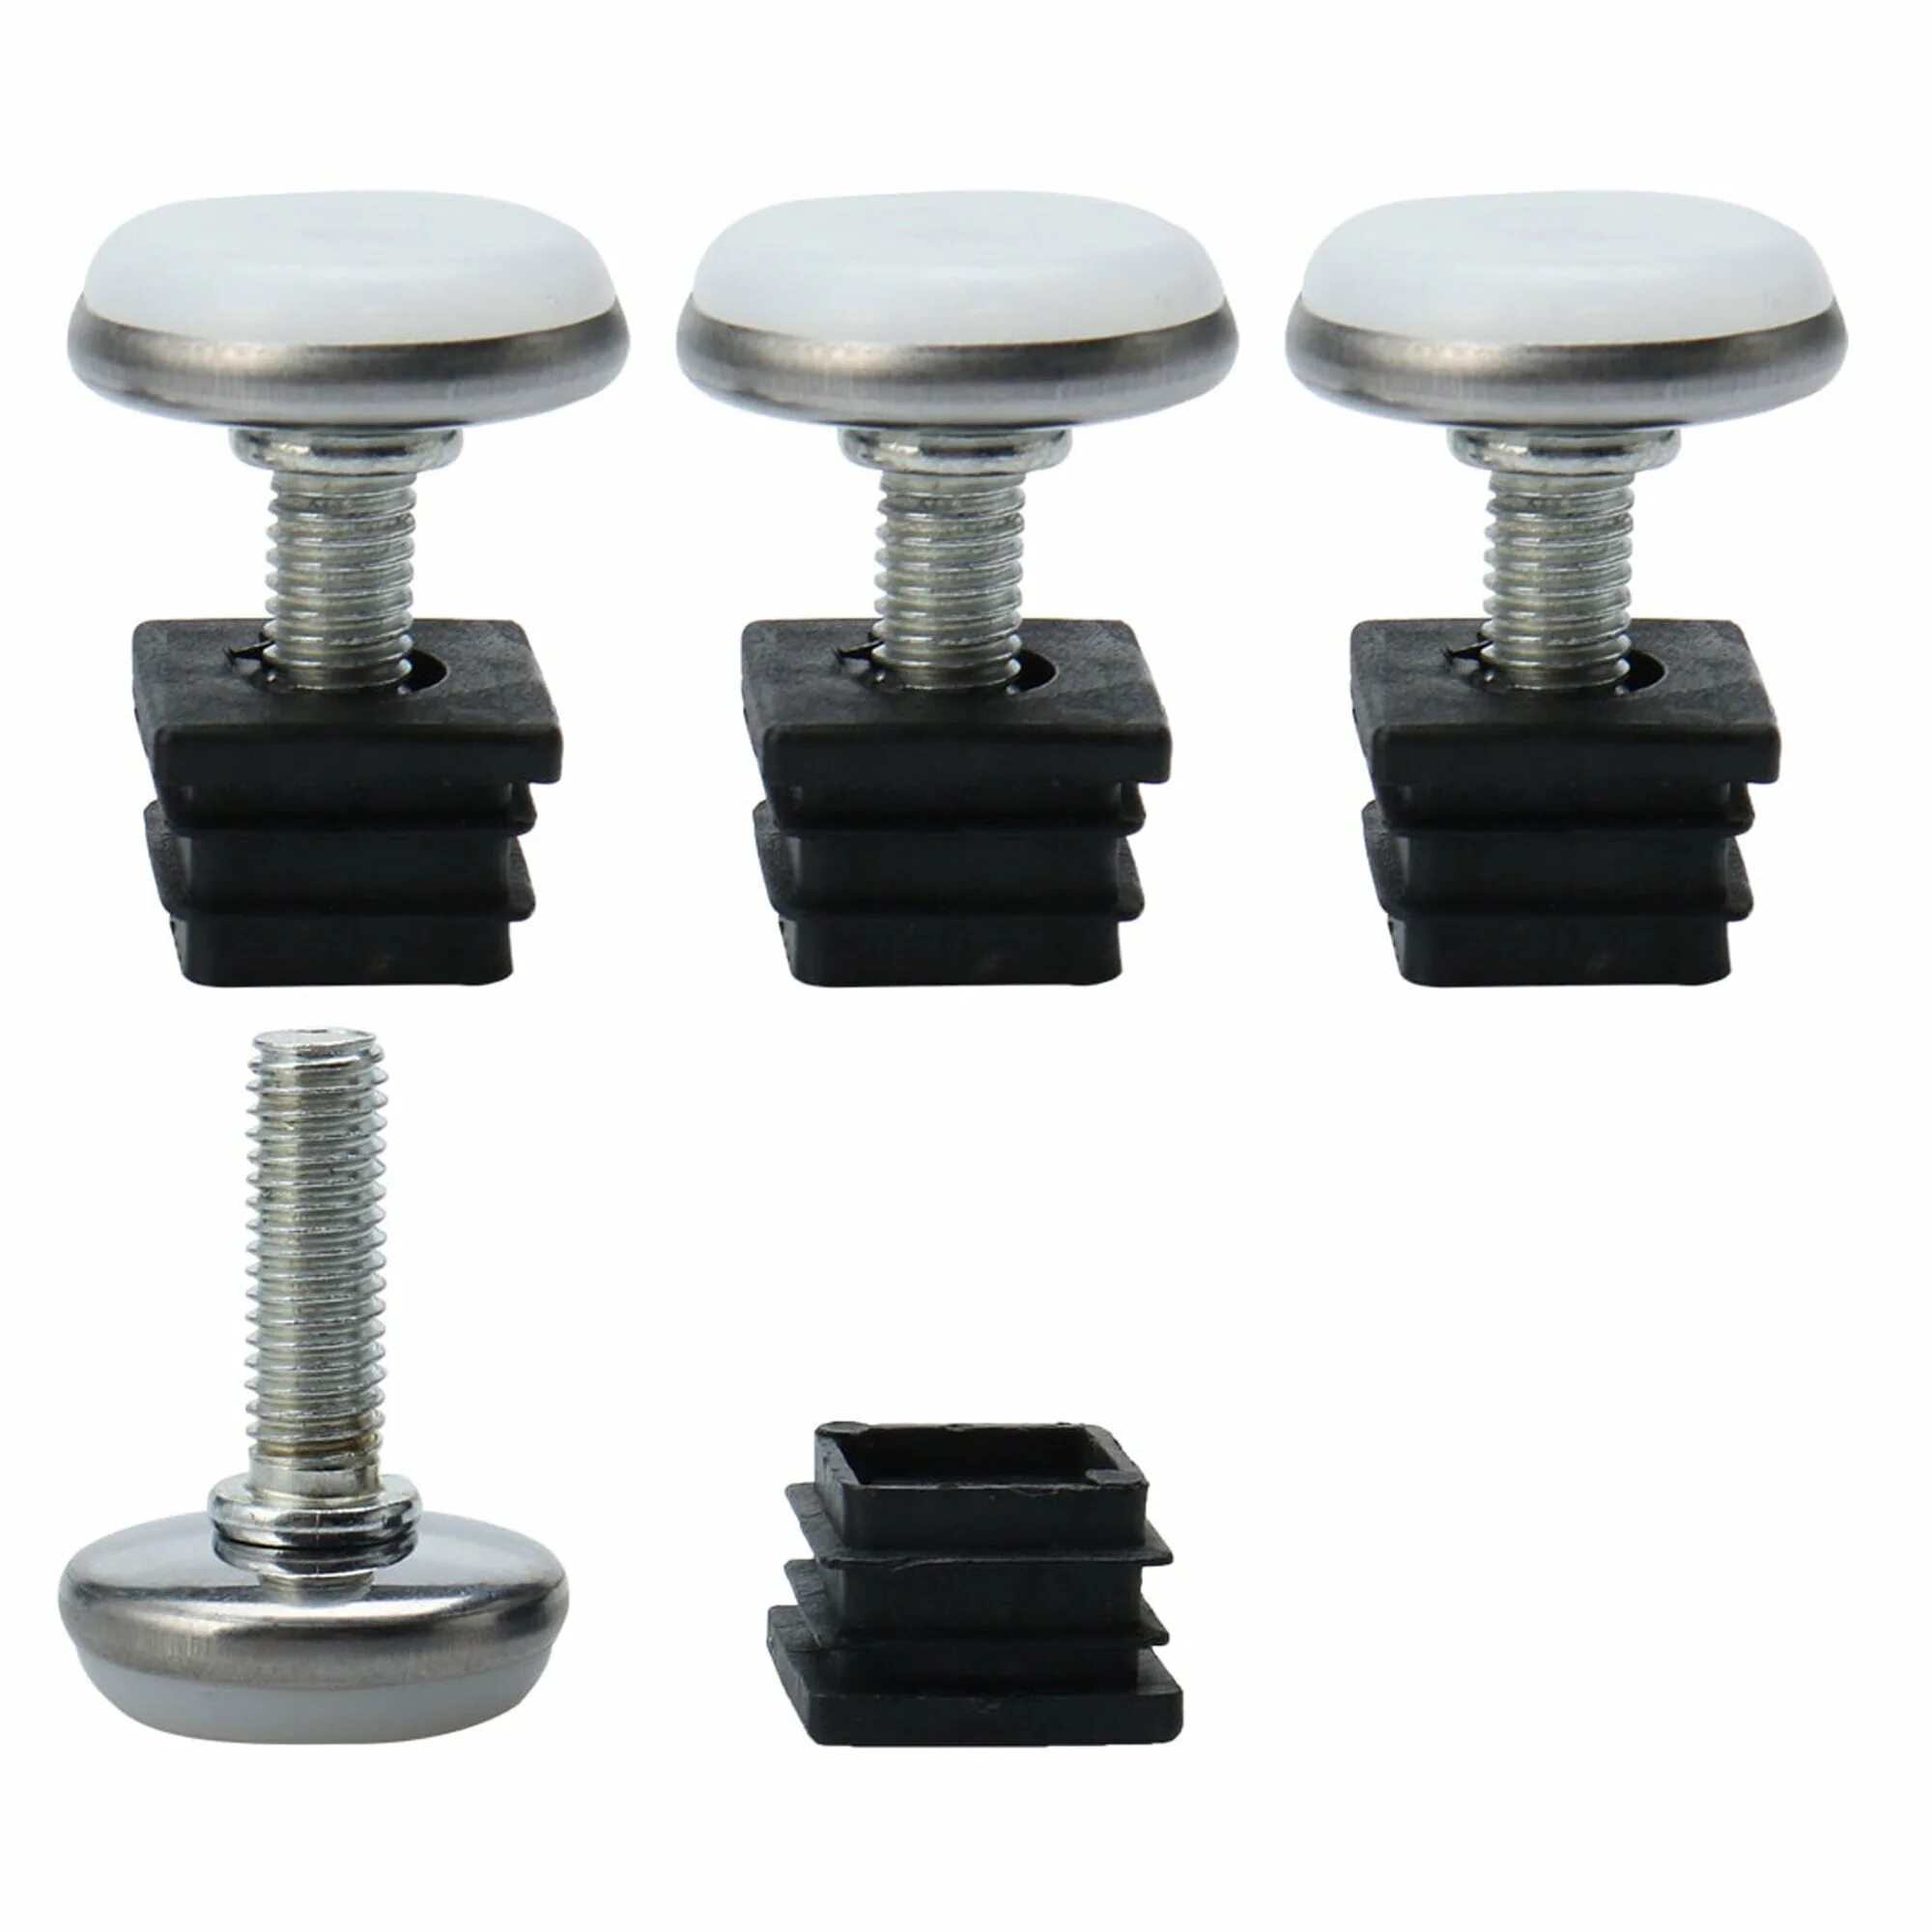 Screw Adjustable foot m10 40mm. 4 X 35 mm Push Fit Square Table Legs Adjustable Levelling Screw feet foot Inserts Poland Franke. Kit for Kit мебельная фурнитура. Screw Adjustable foot. Leveling foot